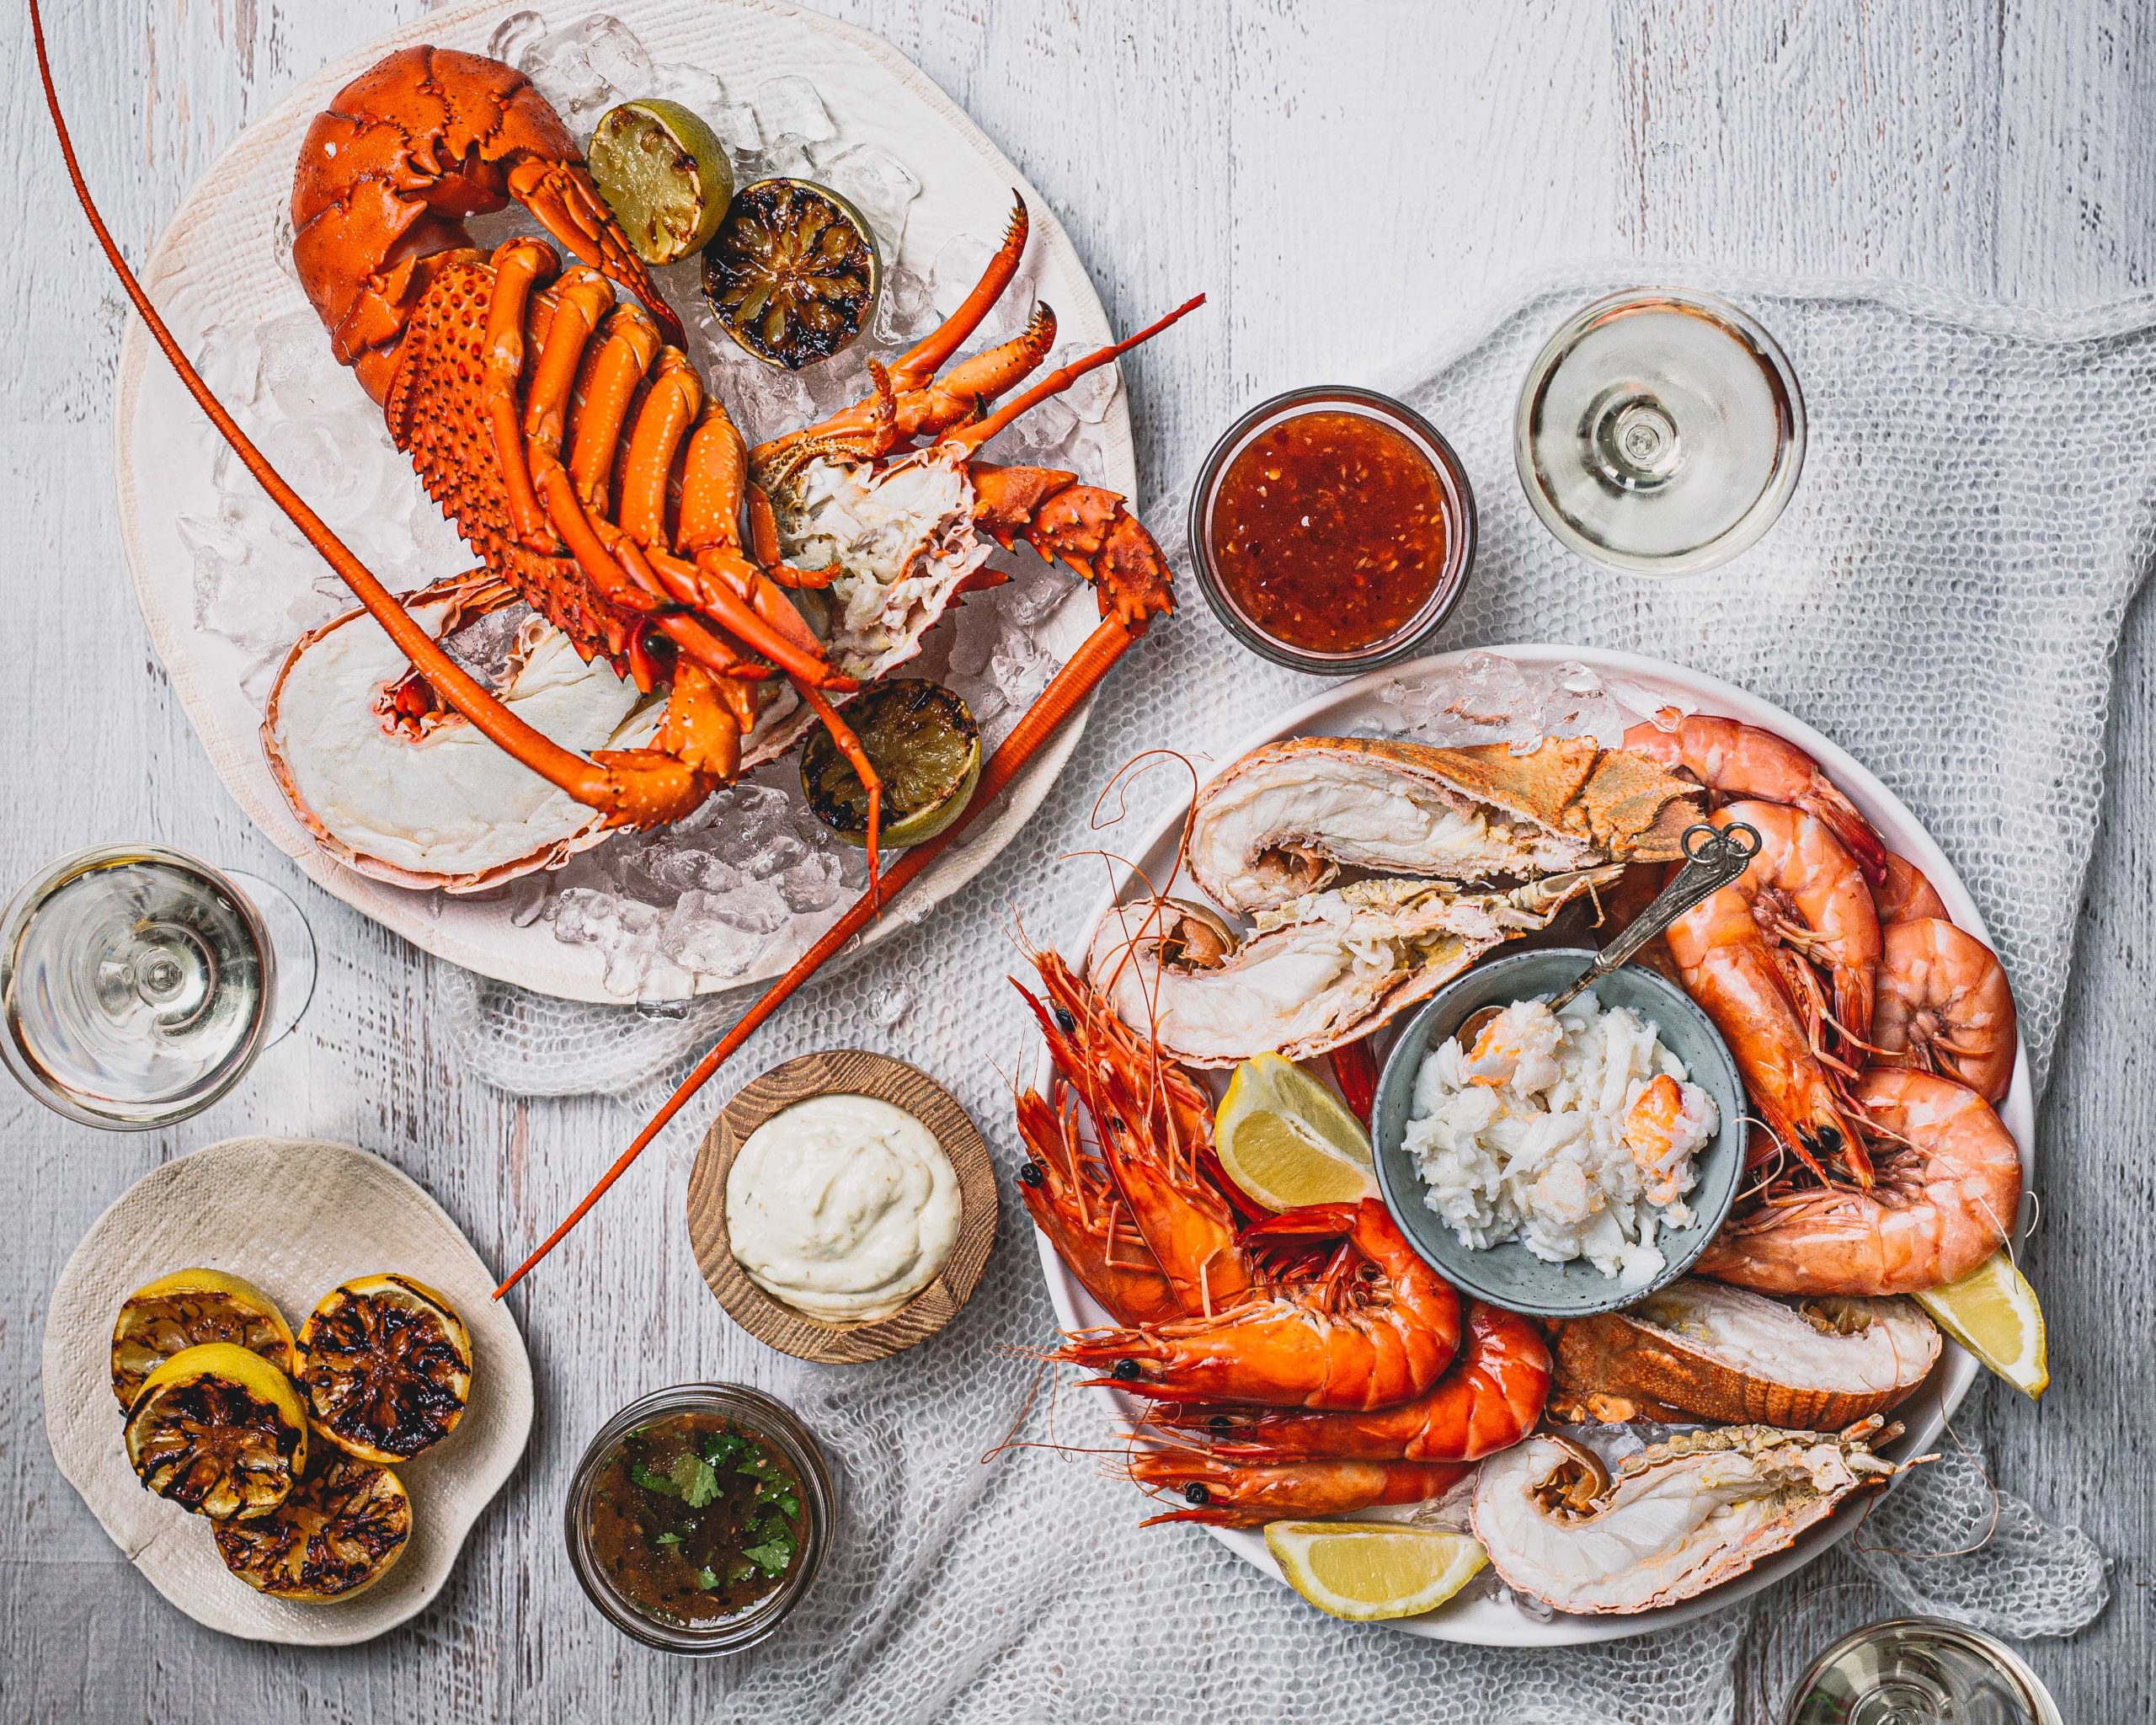 You are currently viewing ‘Celebrate with Australian seafood’: Australian seafood availability and price guide for Christmas 2021